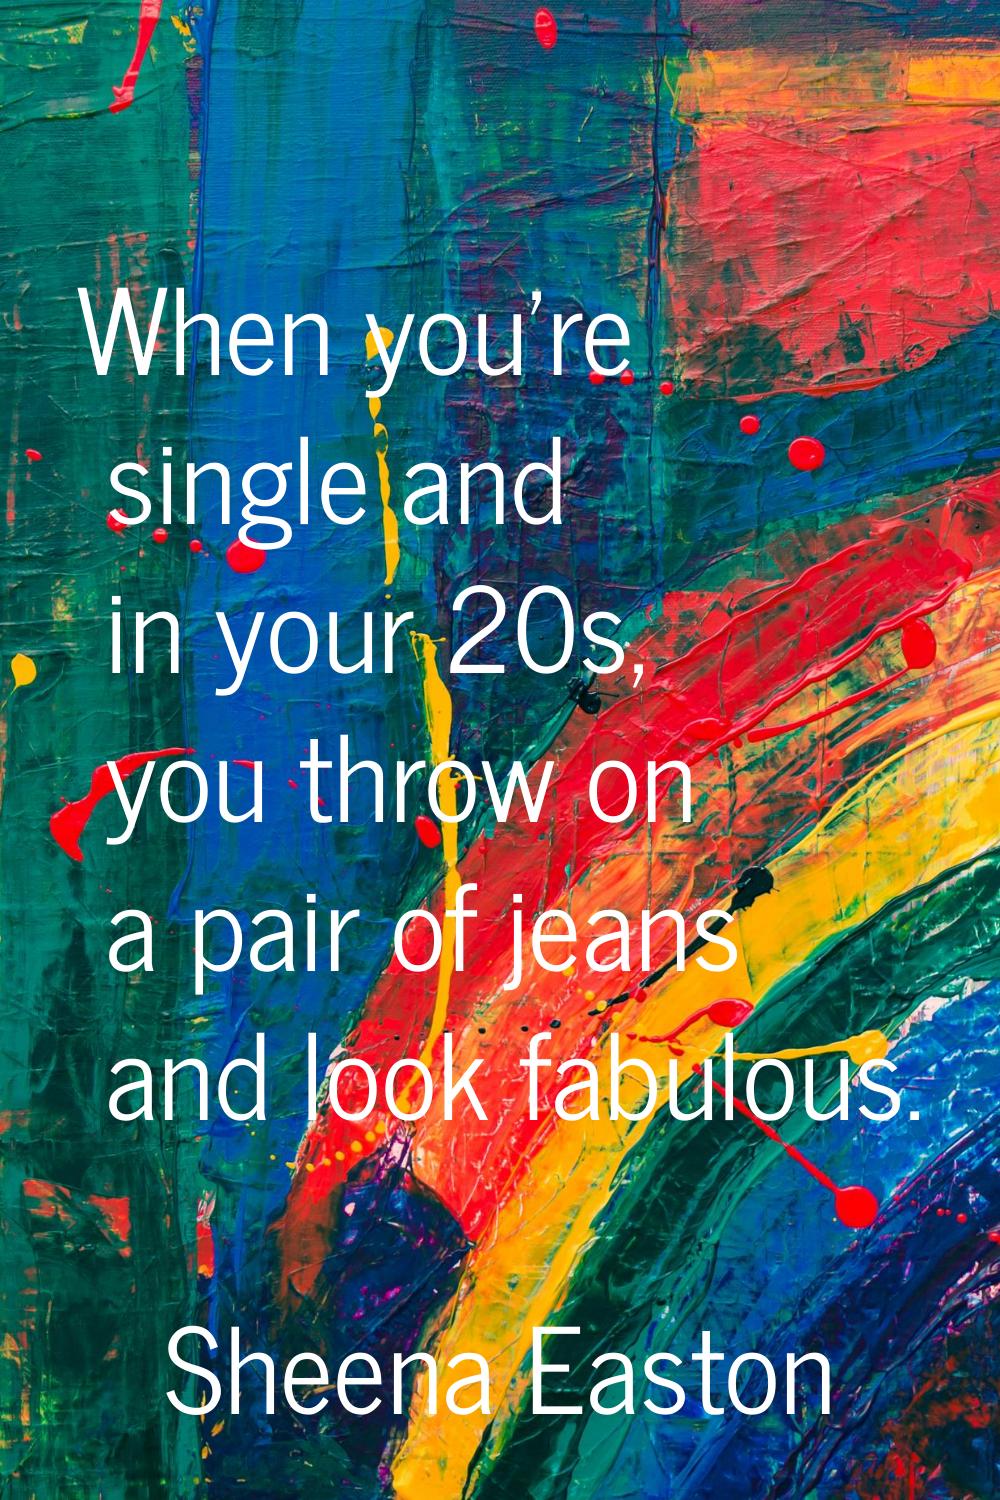 When you're single and in your 20s, you throw on a pair of jeans and look fabulous.